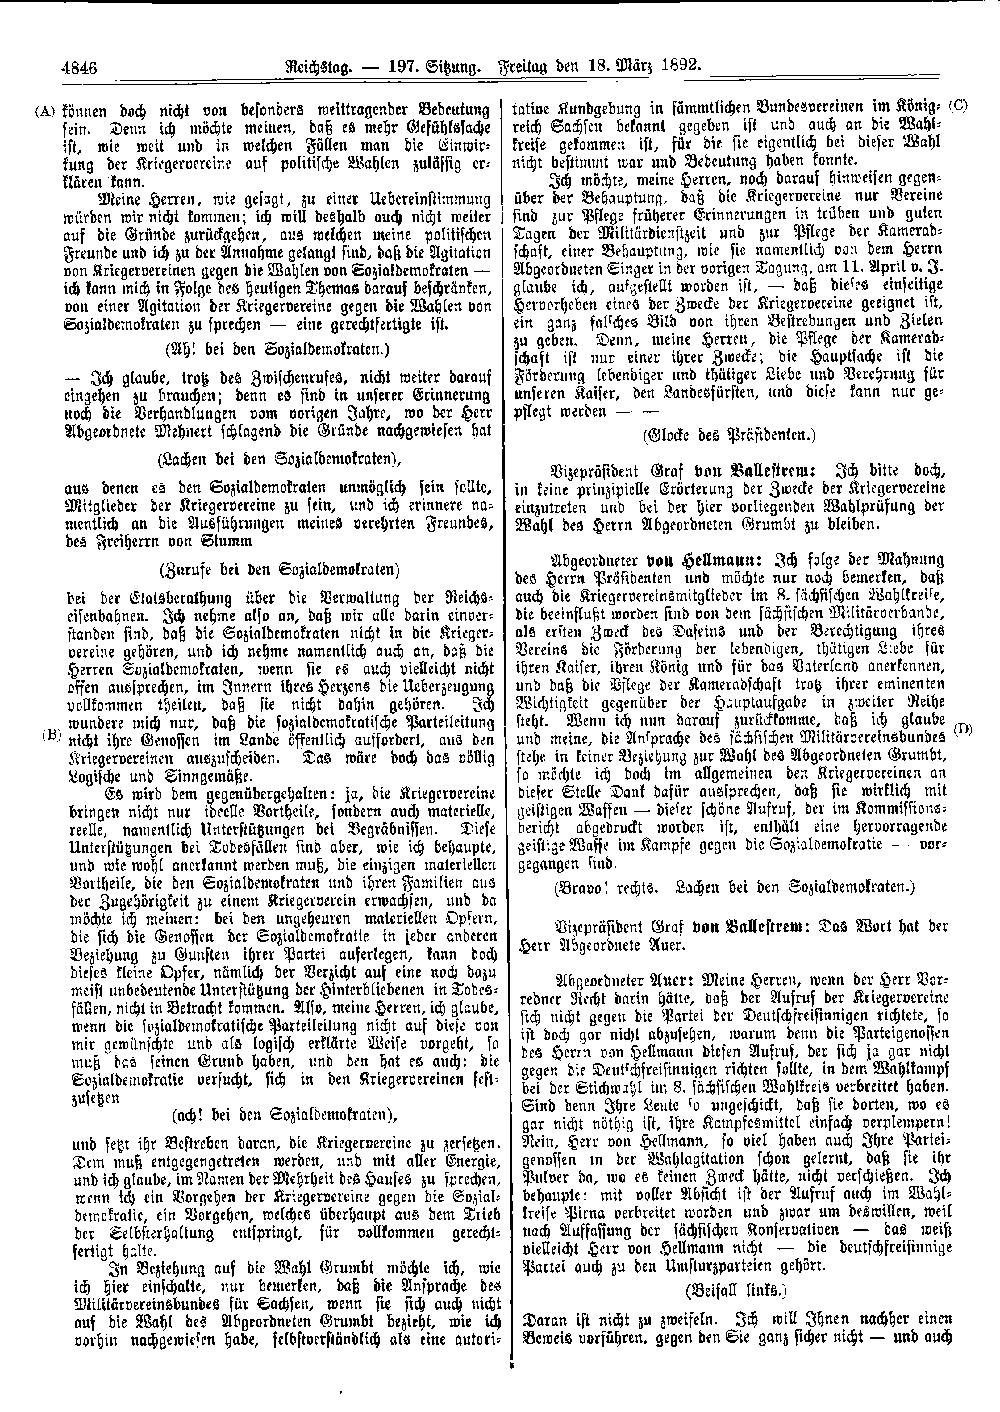 Scan of page 4846